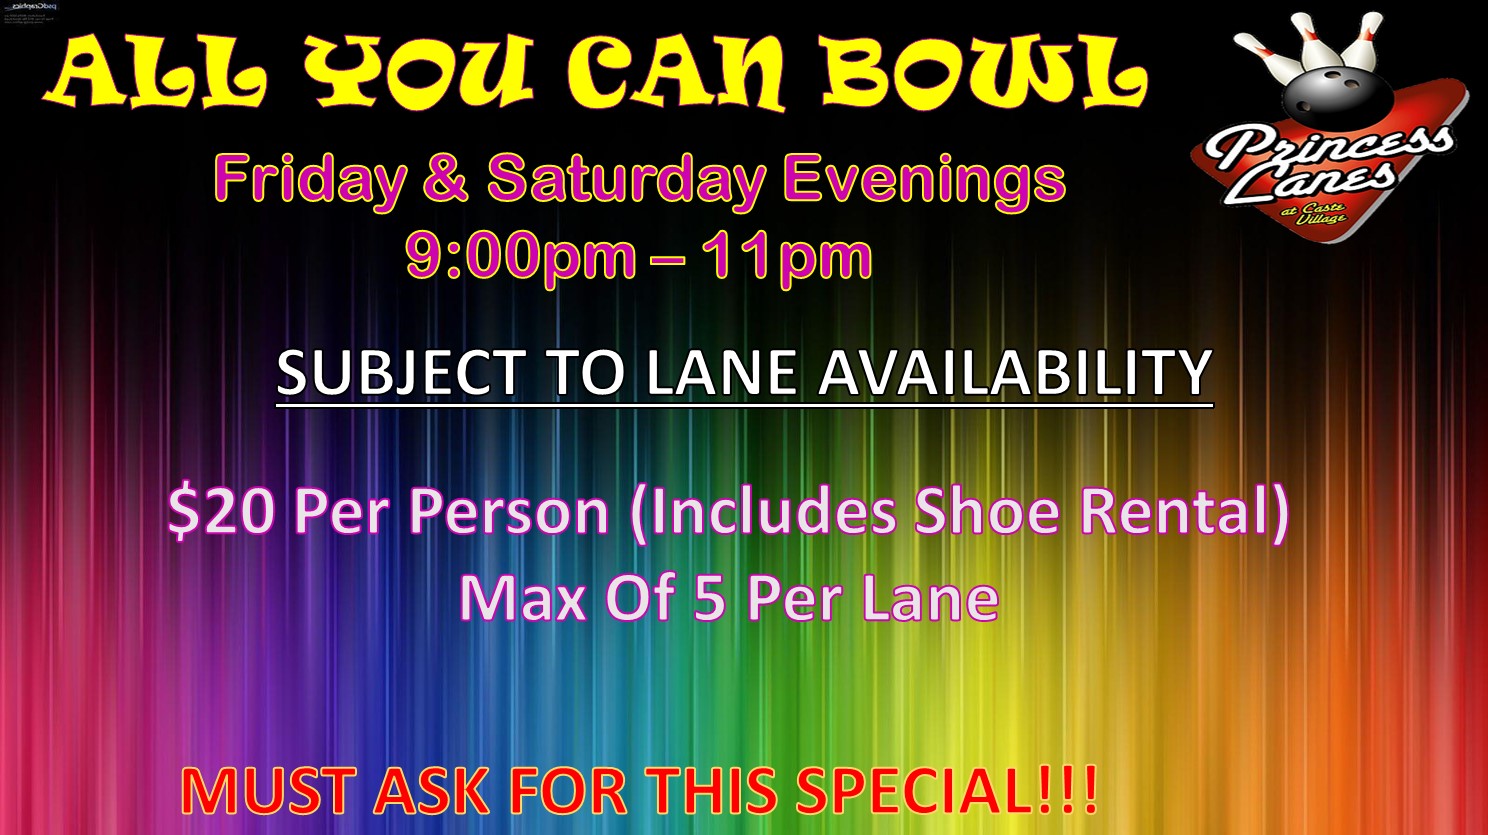 All You Can Bowl Special at Princess Lanes